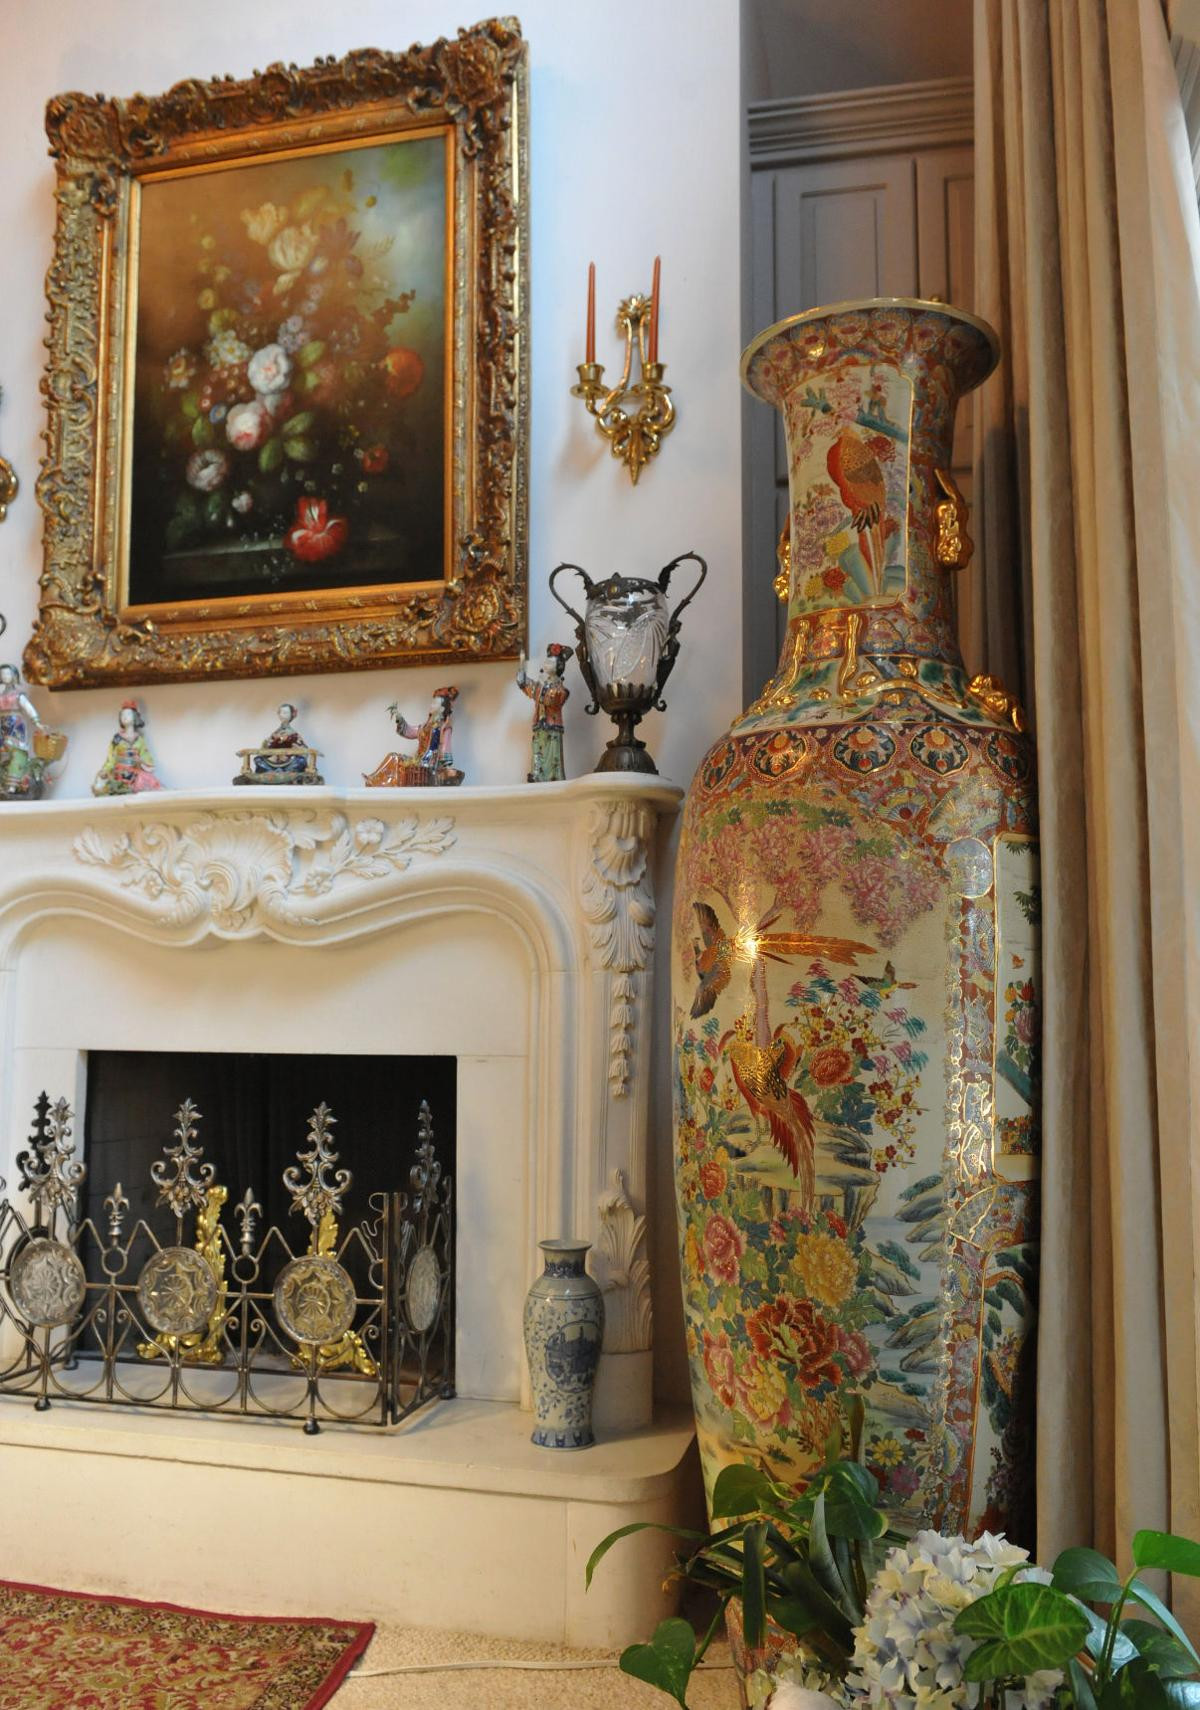 22 Lovable Old oriental Vases 2024 free download old oriental vases of old south elegance a couples lafayette home evokes echoes of long with regard to old south elegance a couples lafayette home evokes echoes of long ago home garden thead